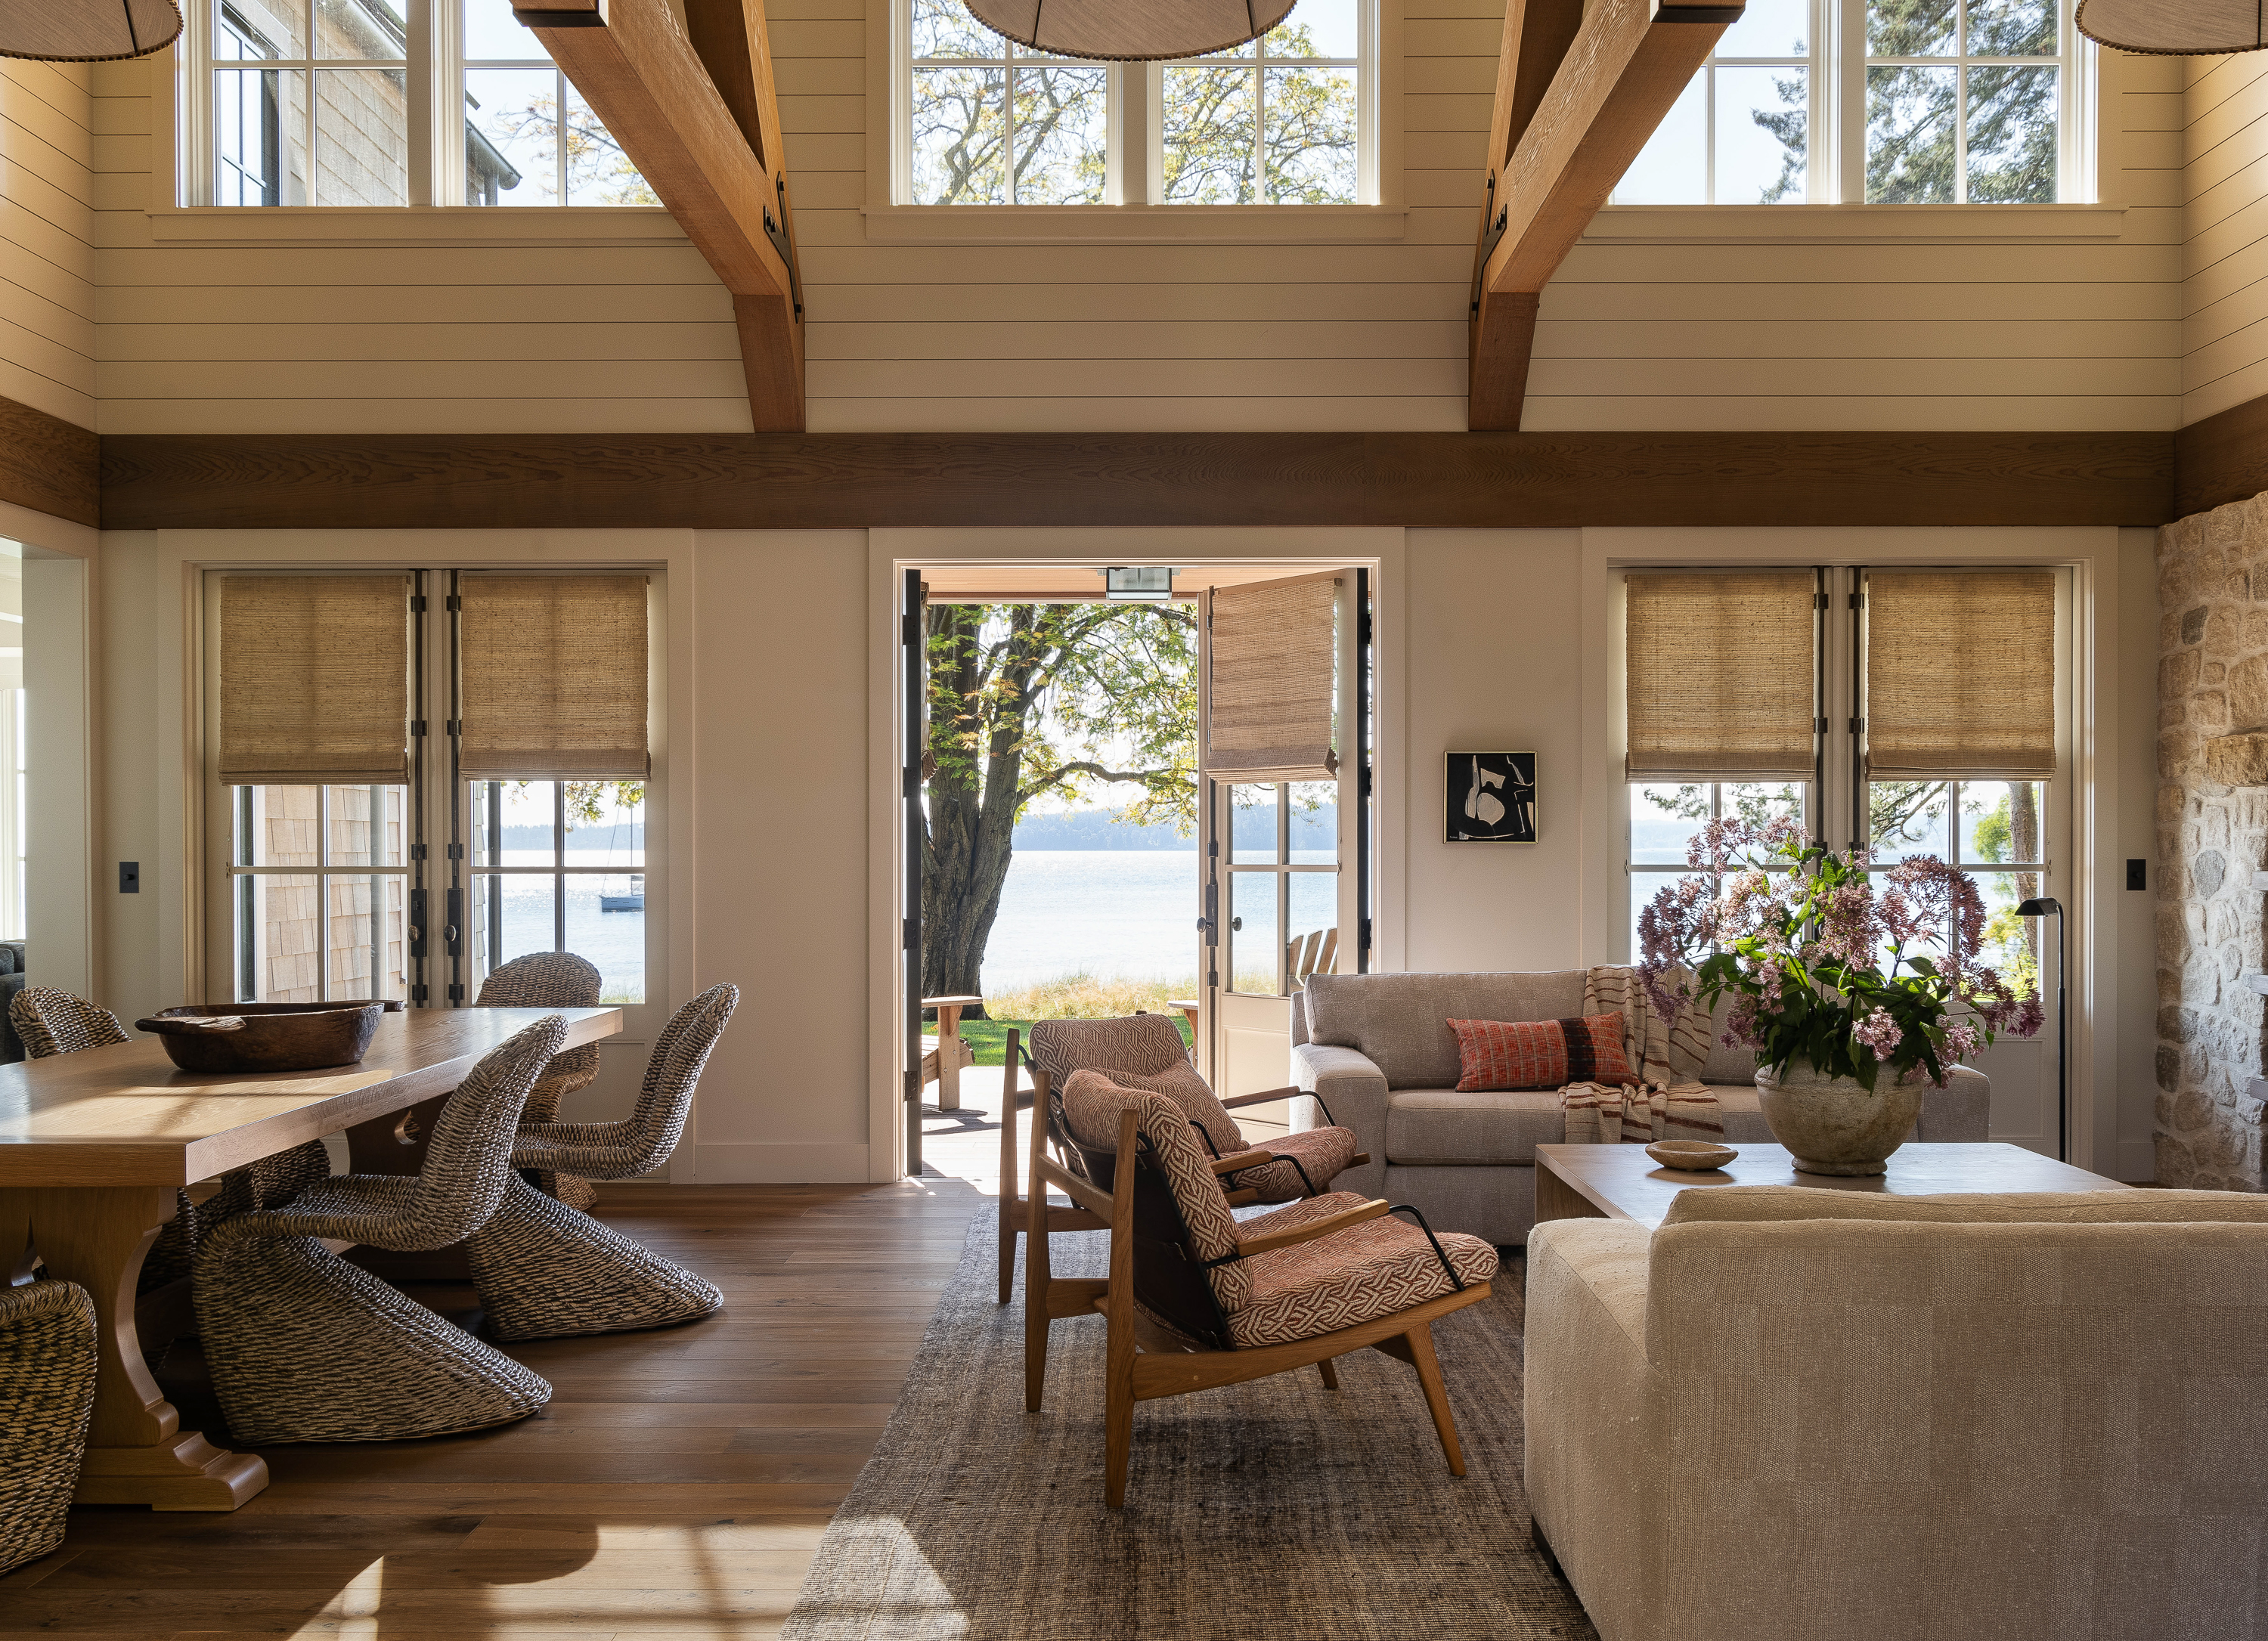 A view through the open concept living and dining area, revealing three sets of double doors that open to the waterfront, seamlessly integrating the indoor and outdoor spaces.